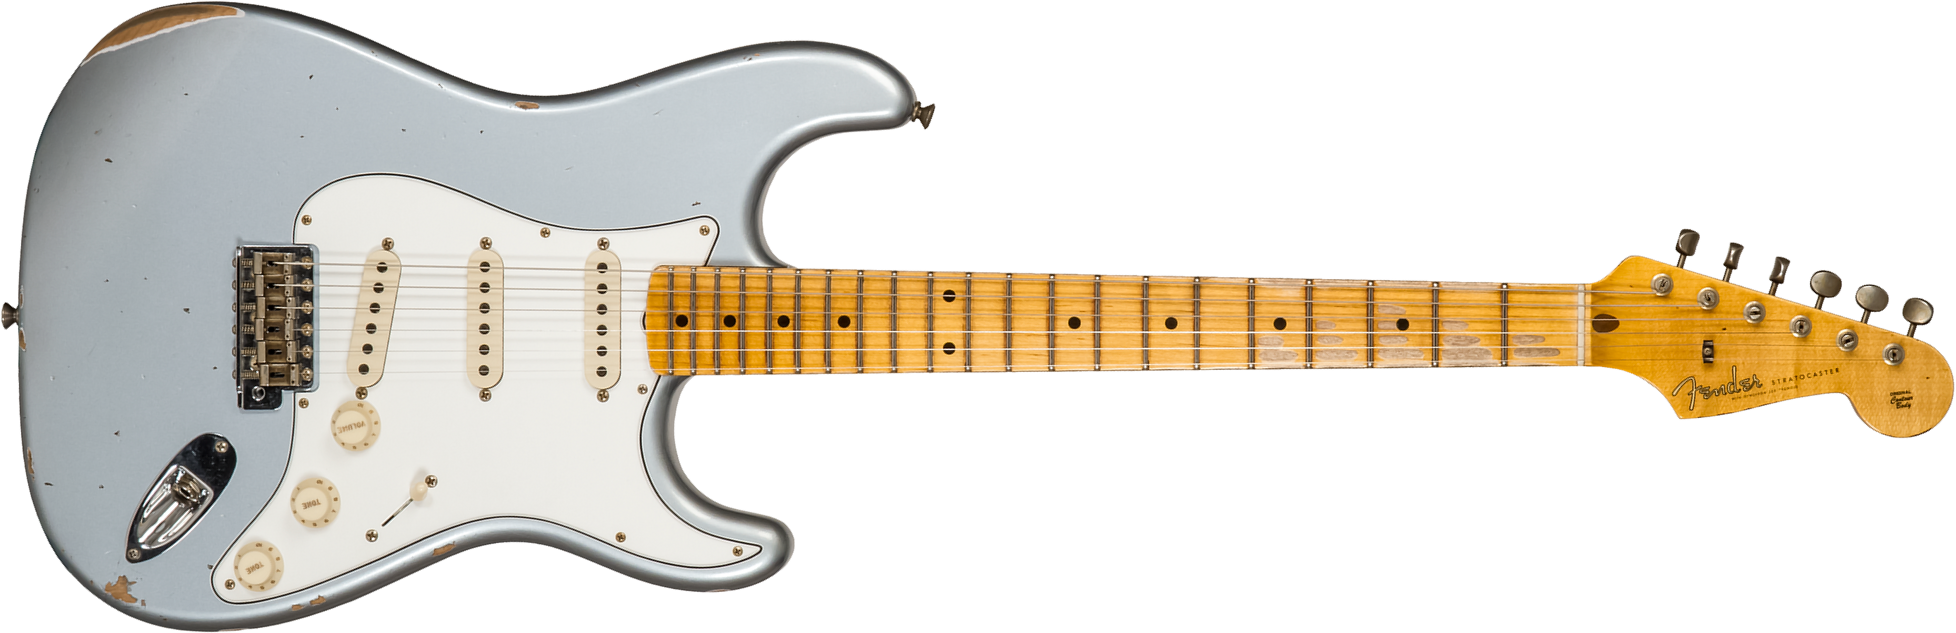 Fender Custom Shop Strat Tomatillo Special 3s Trem Mn #cz571096 - Relic Aged Ice Blue Metallic - Str shape electric guitar - Main picture